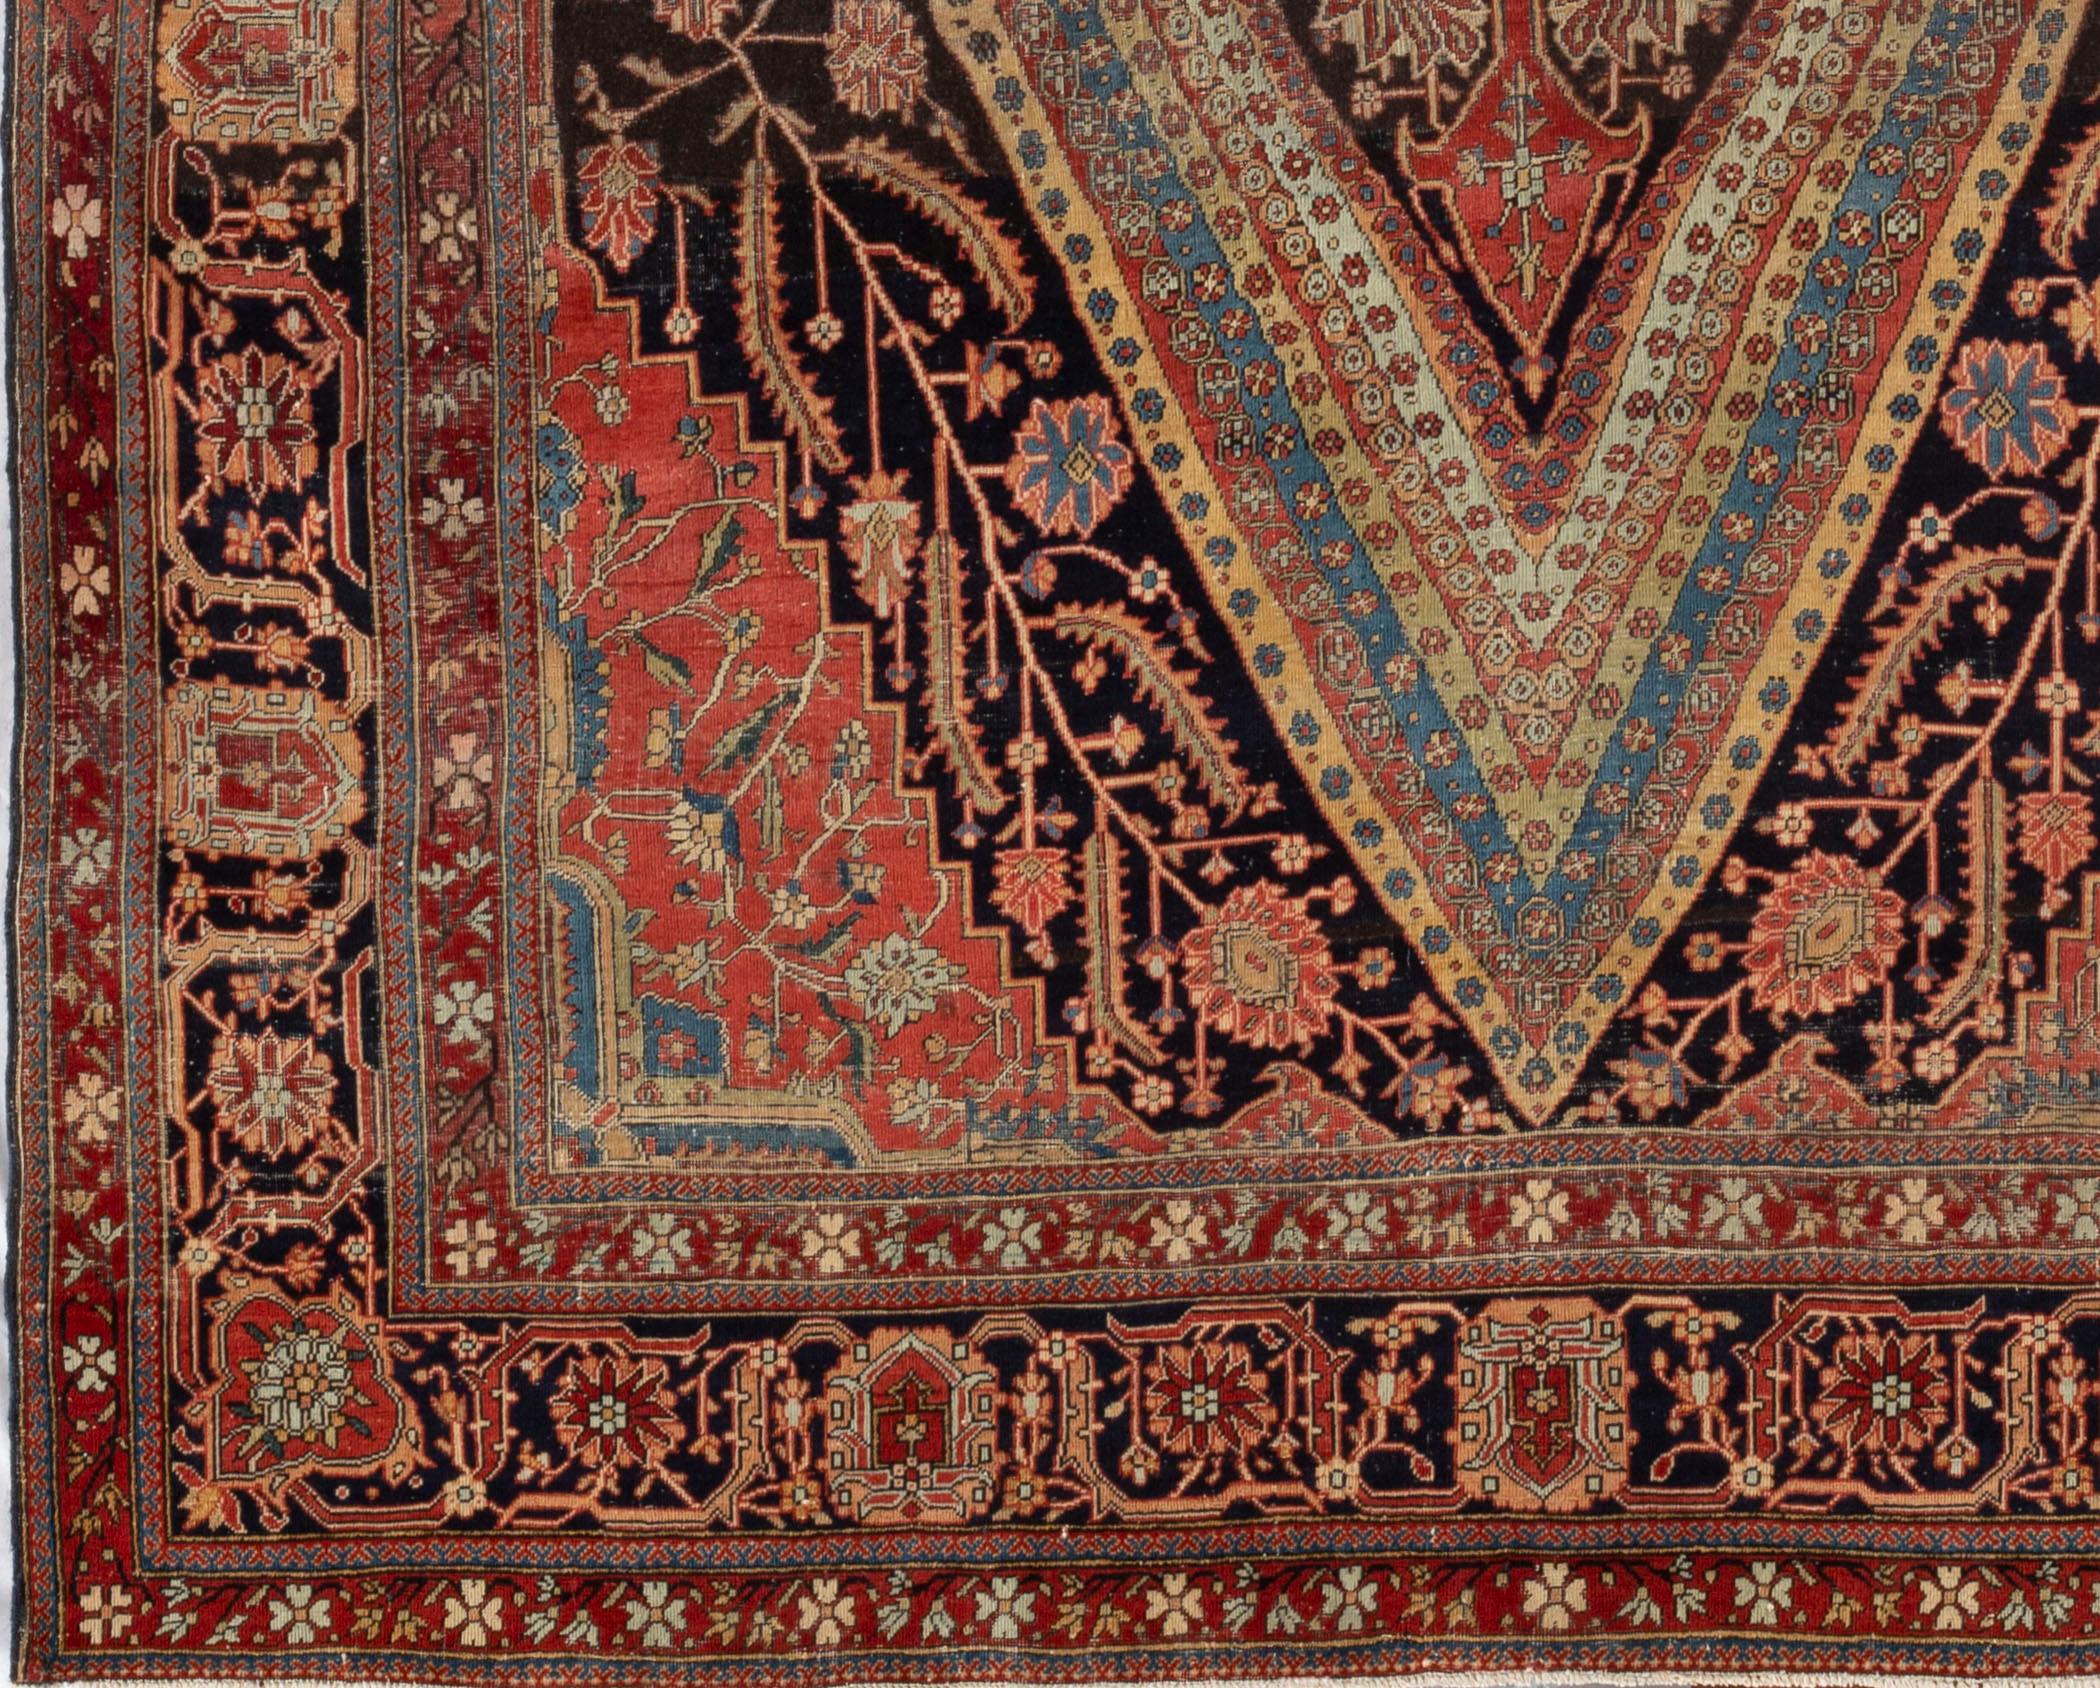 Antique Kashan Mohtashem Multi, circa 1880. Mohtashem signifies the name of the master weaver whose works belong at the top of the highest category of rugs. In the later 19th century carpet weaving was revived by Hajji Mollah Hasan Mohtashem,